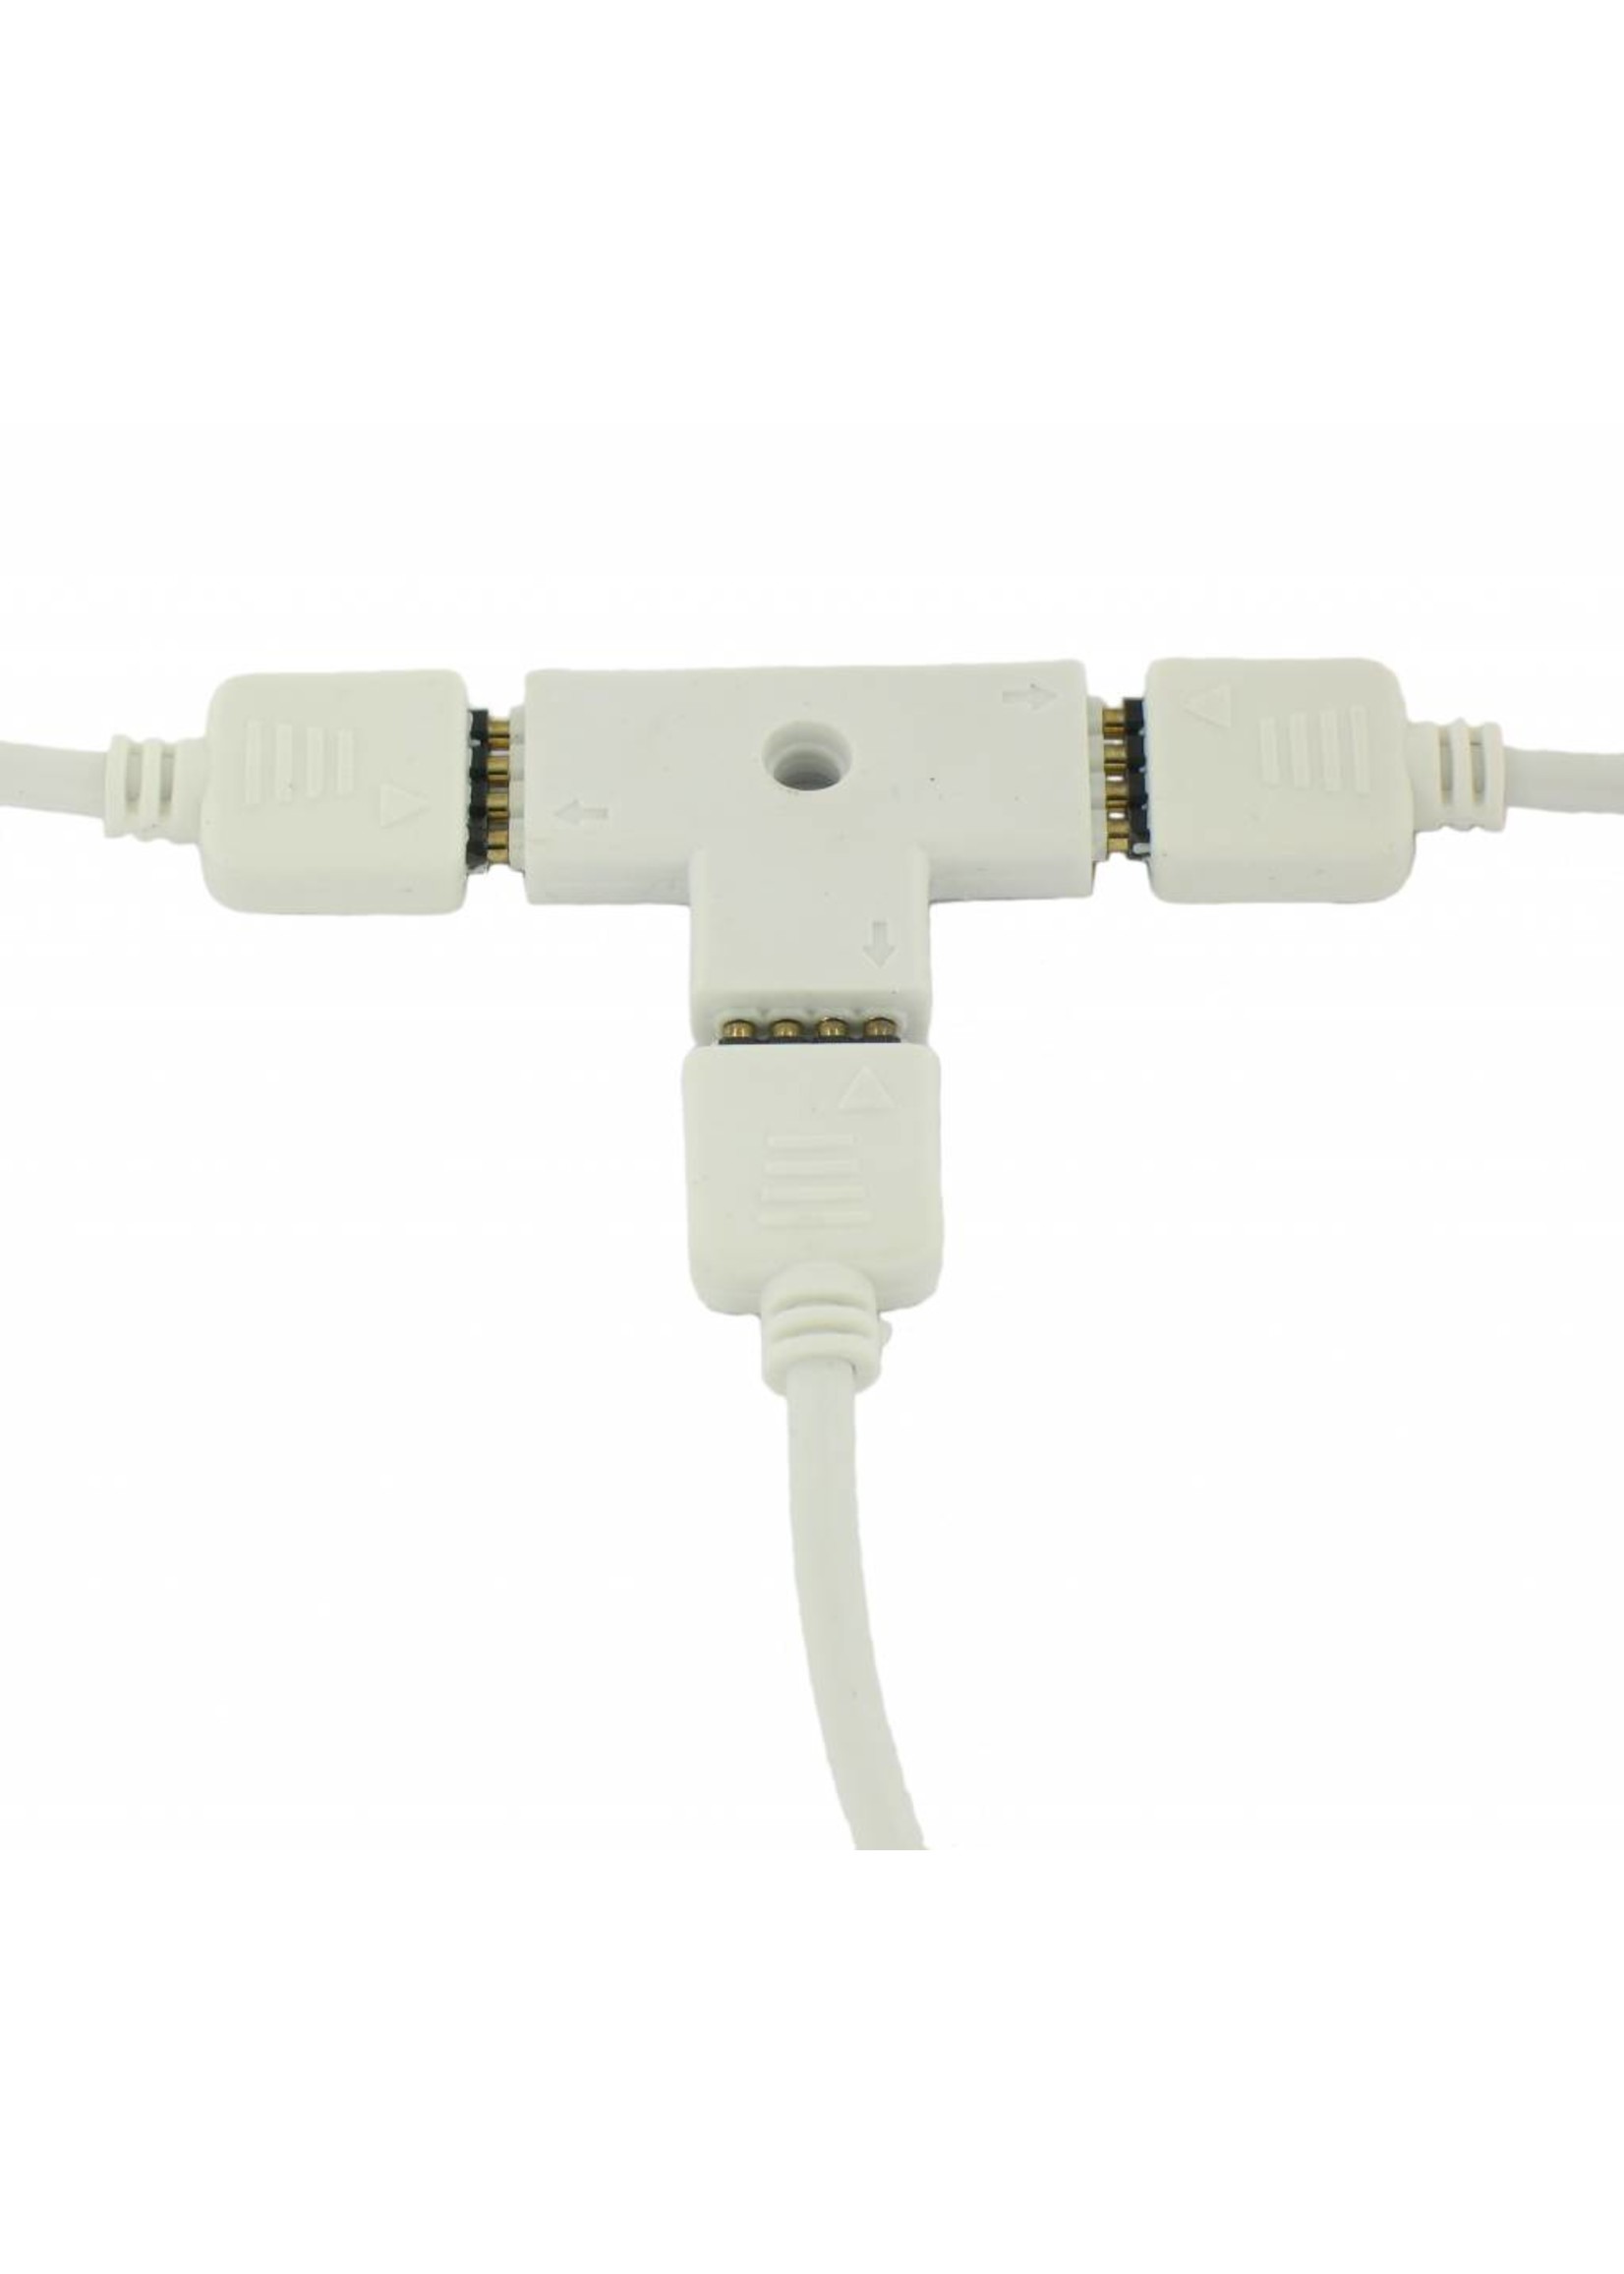 Spliter Connector for RGB LED Strips 3 angles